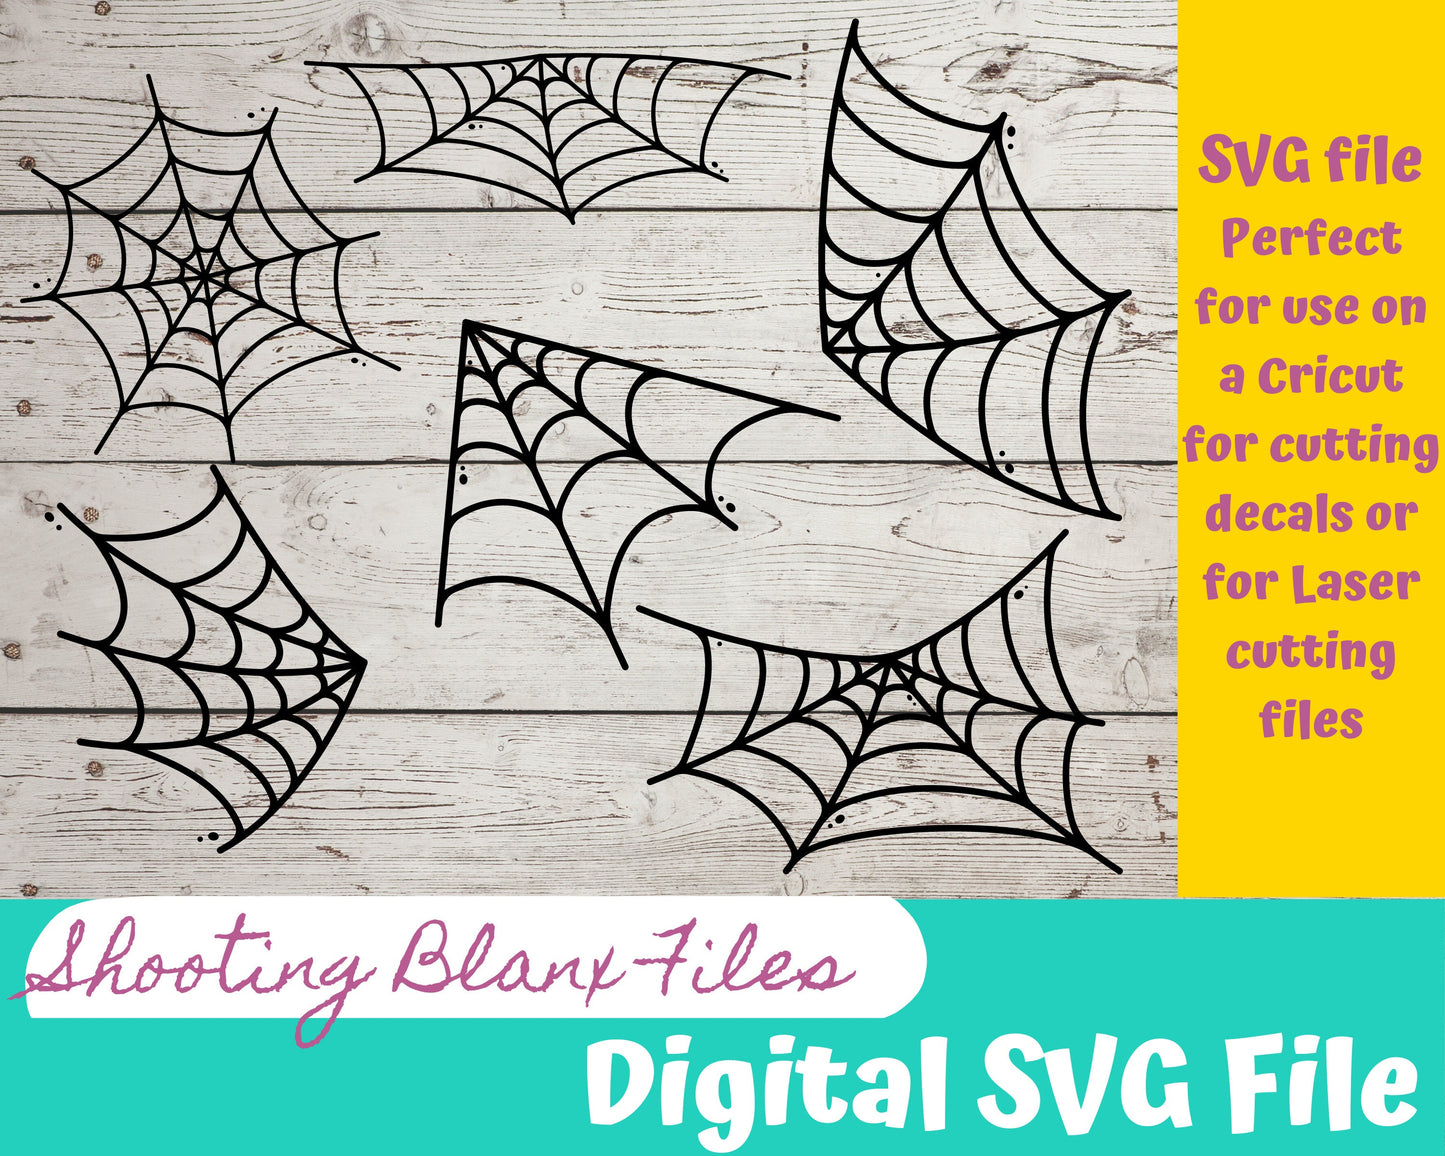 Spider Web SVG file for Cricut - laser Glowforge, Scary, Minimalistic, Halloween, Classic, Scary movies,